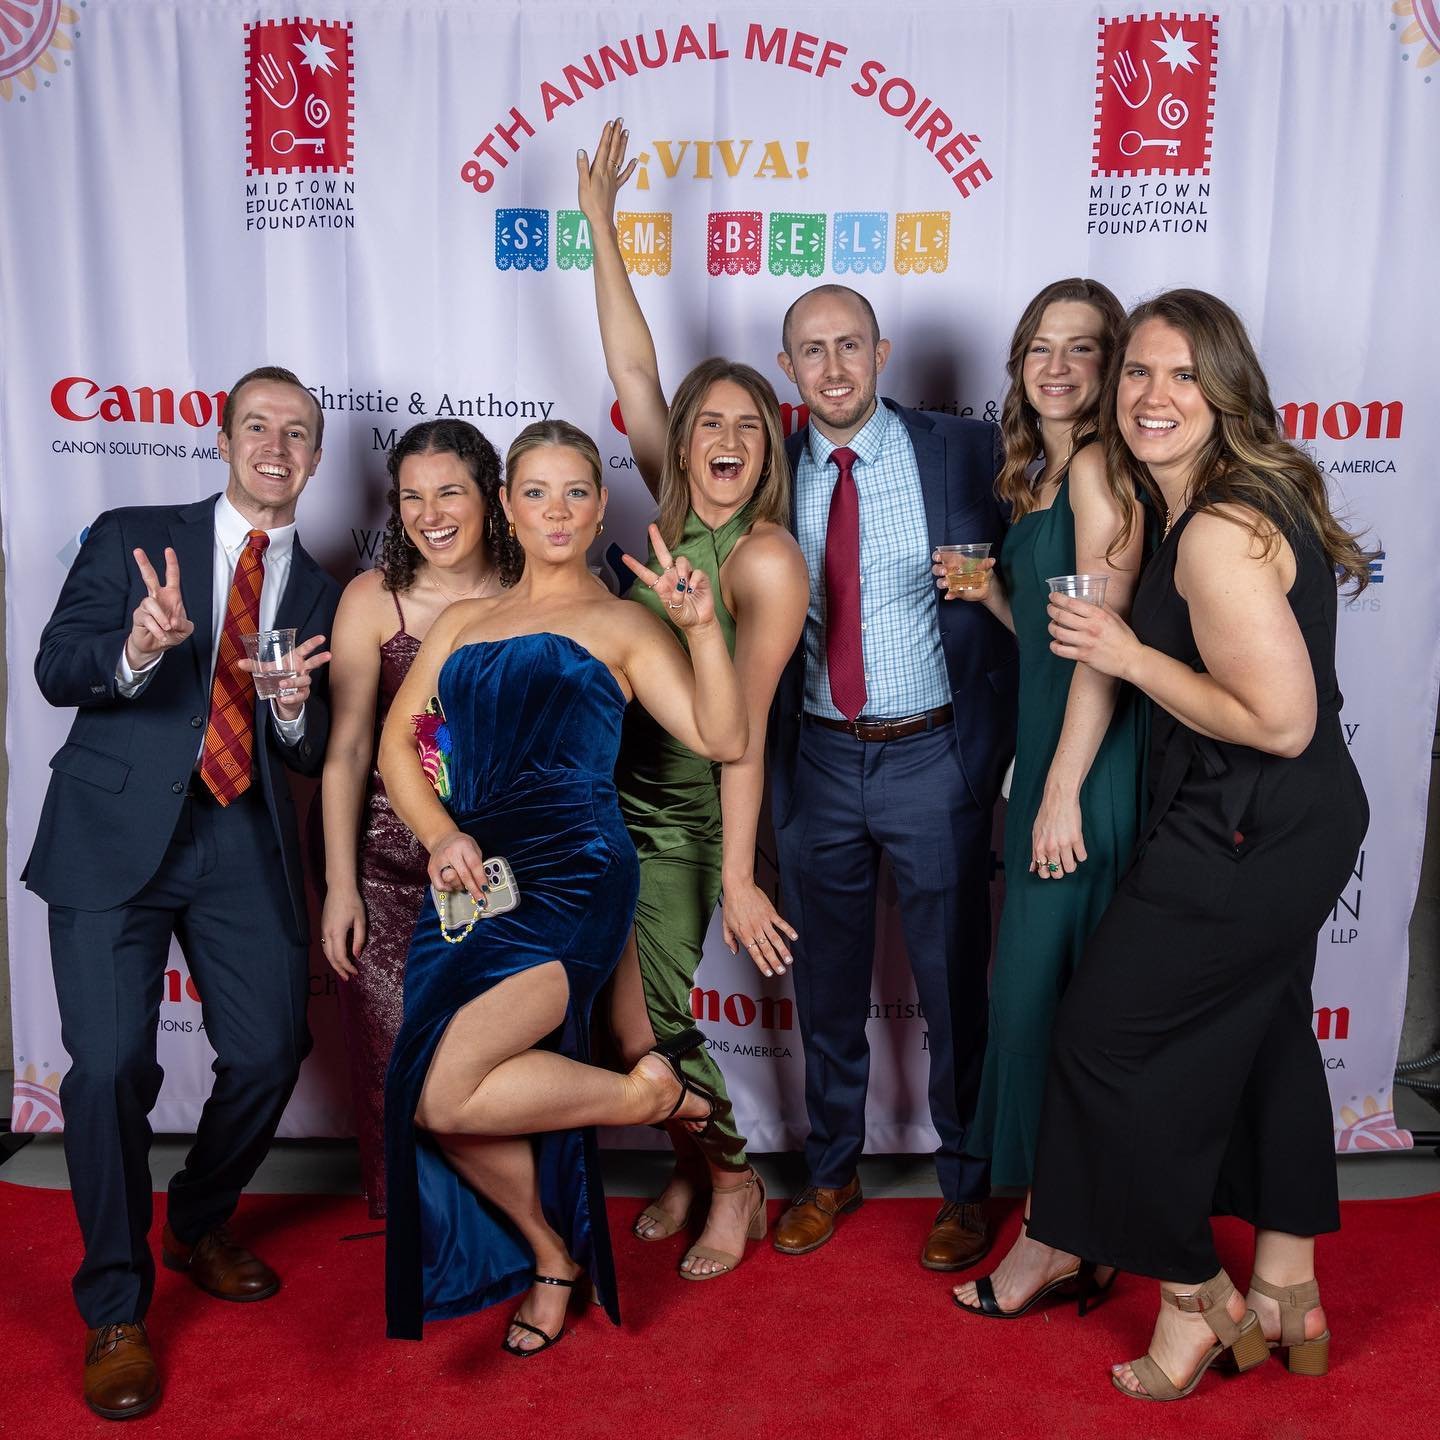 If you haven&rsquo;t already made up your mind to join us at the 9th Annual Midtown-Metro Soir&eacute;e, it&rsquo;s not too late! Tomorrow promises to be a beautiful, balmy evening - perfect for getting a little dressed up,  enjoying an open bar and 